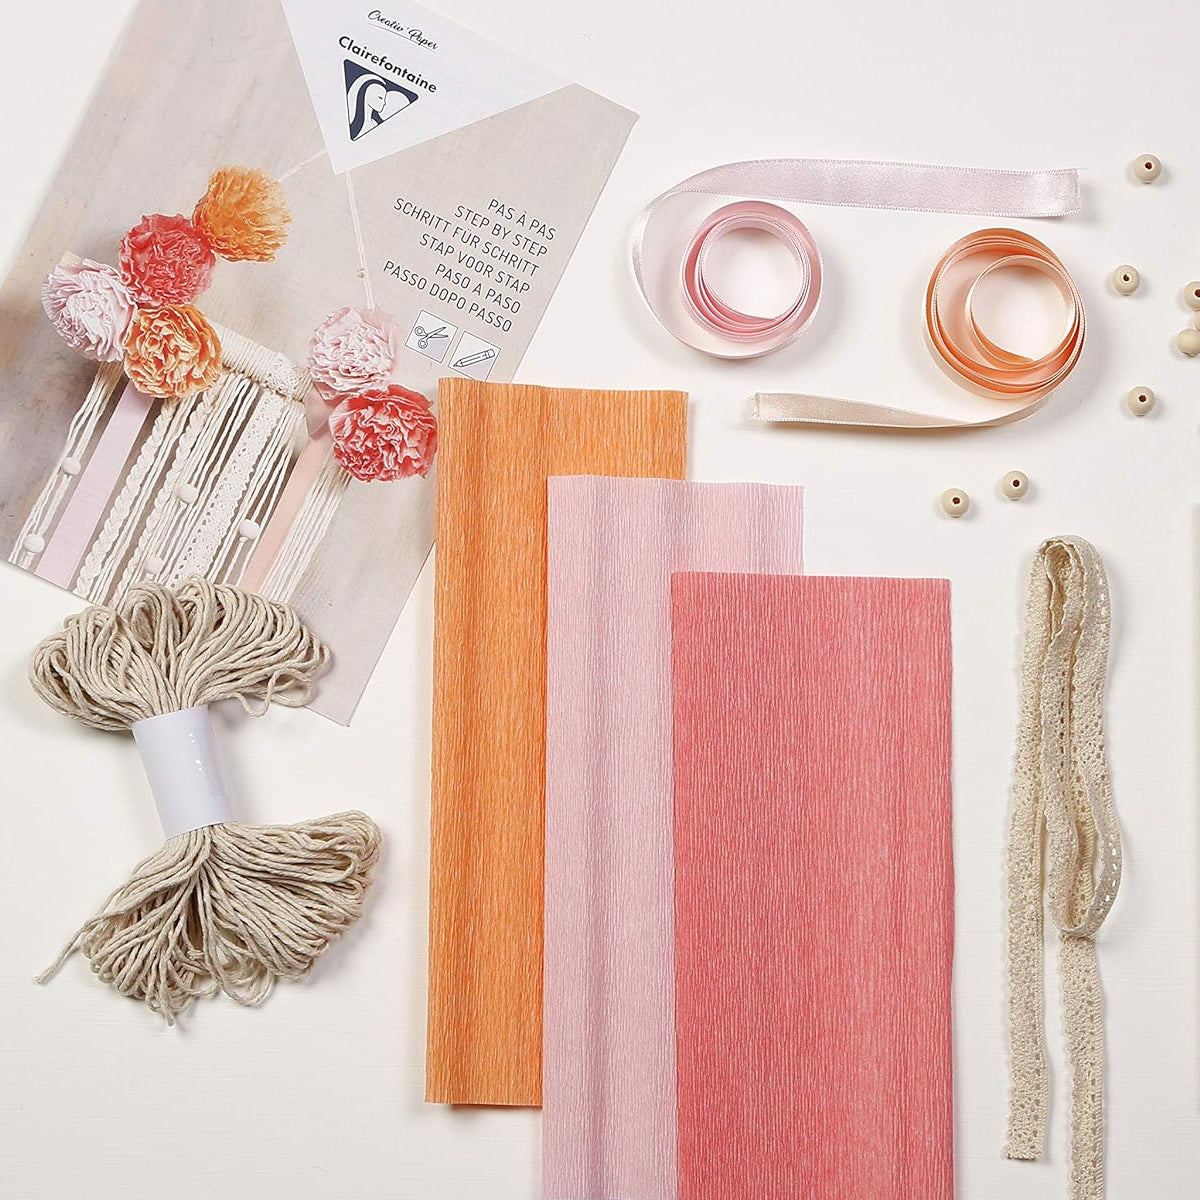 CLAIREFONTAINE Crepe Paper Kits-Macrame Decoration 1216834